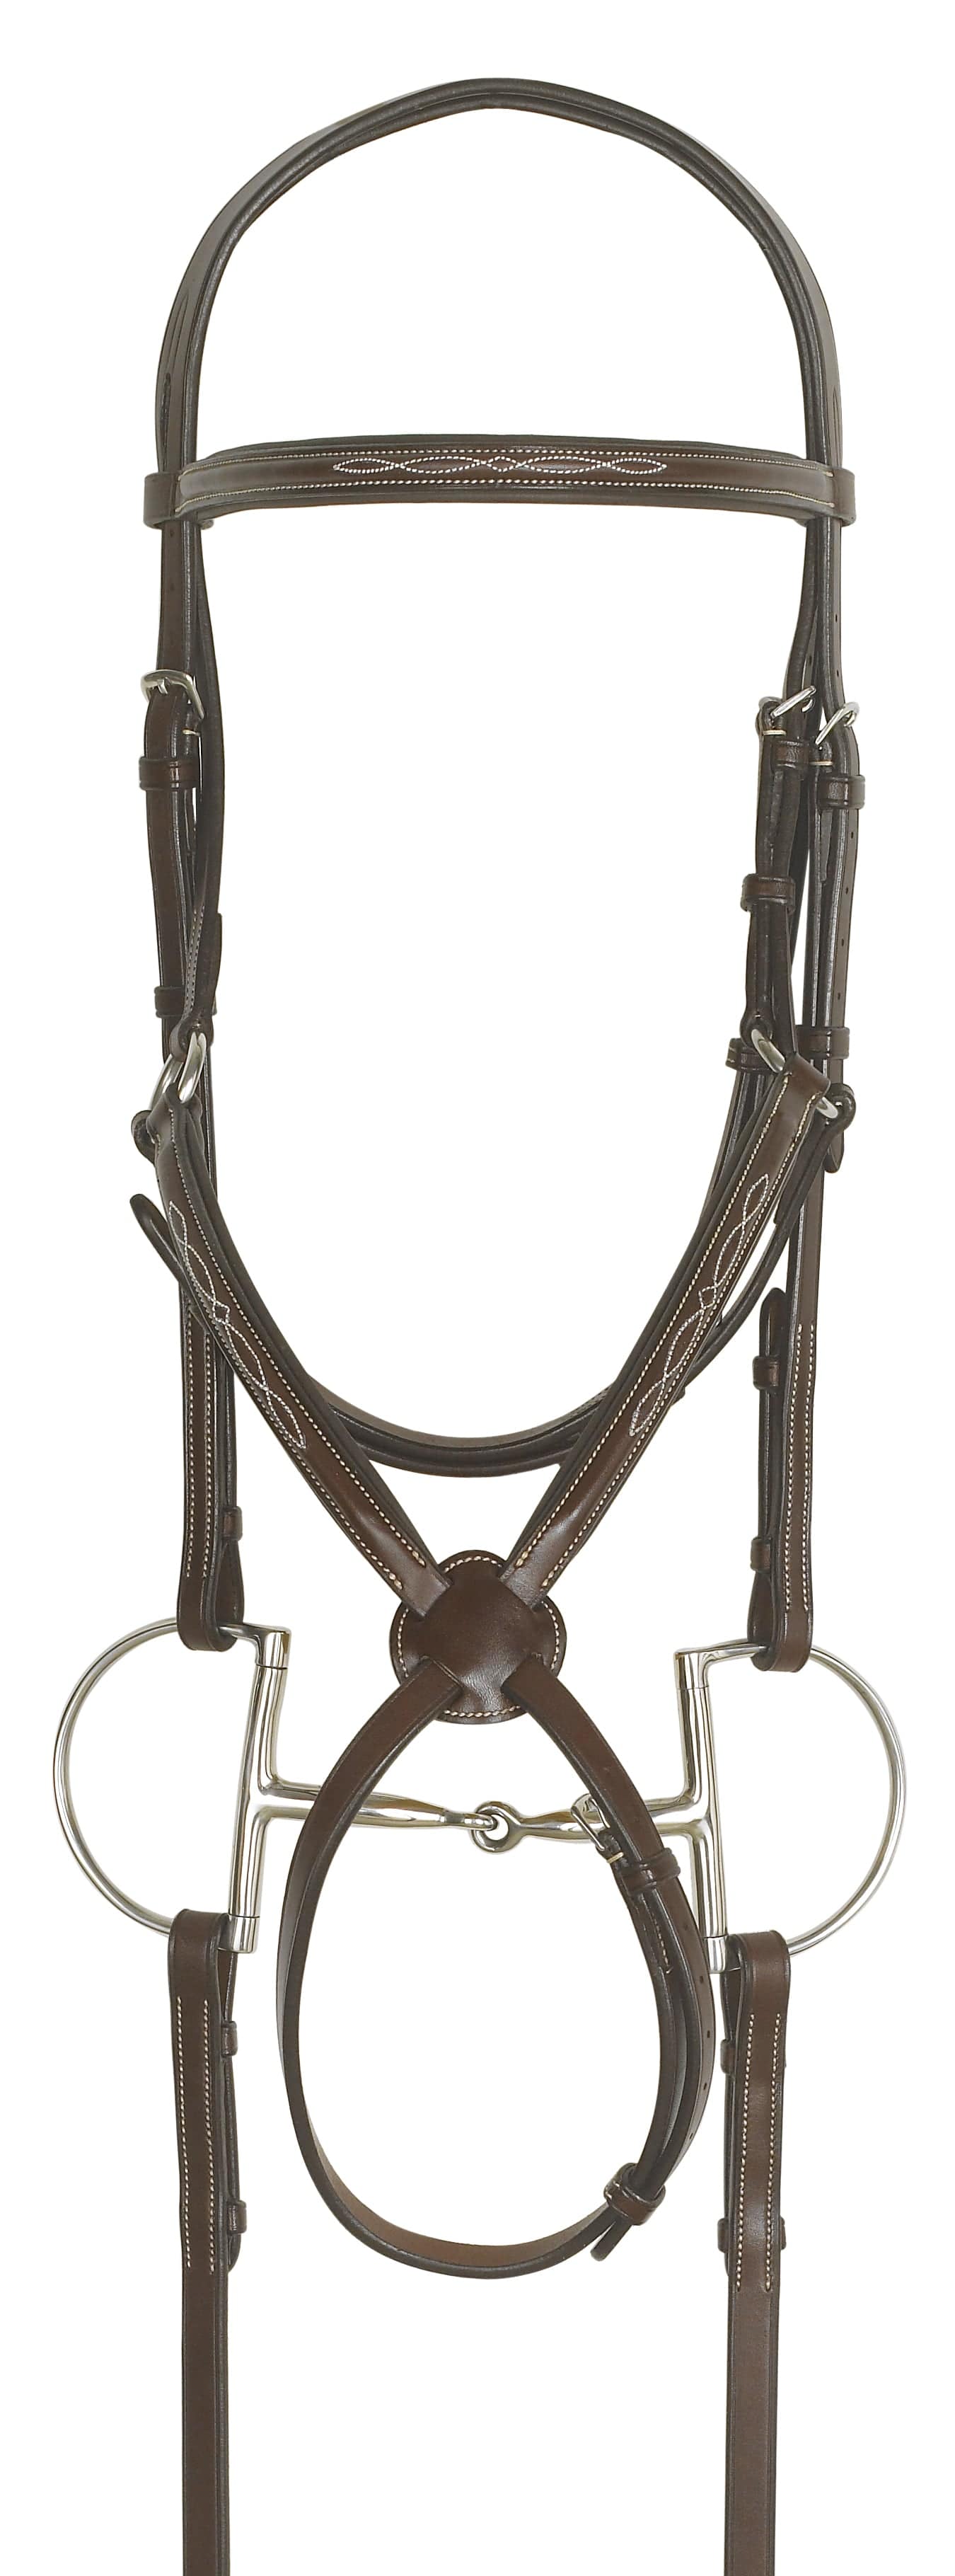 Ovation Elite Collection- Fancy Raised Figure-8 Comfort Crown Padded Bridle